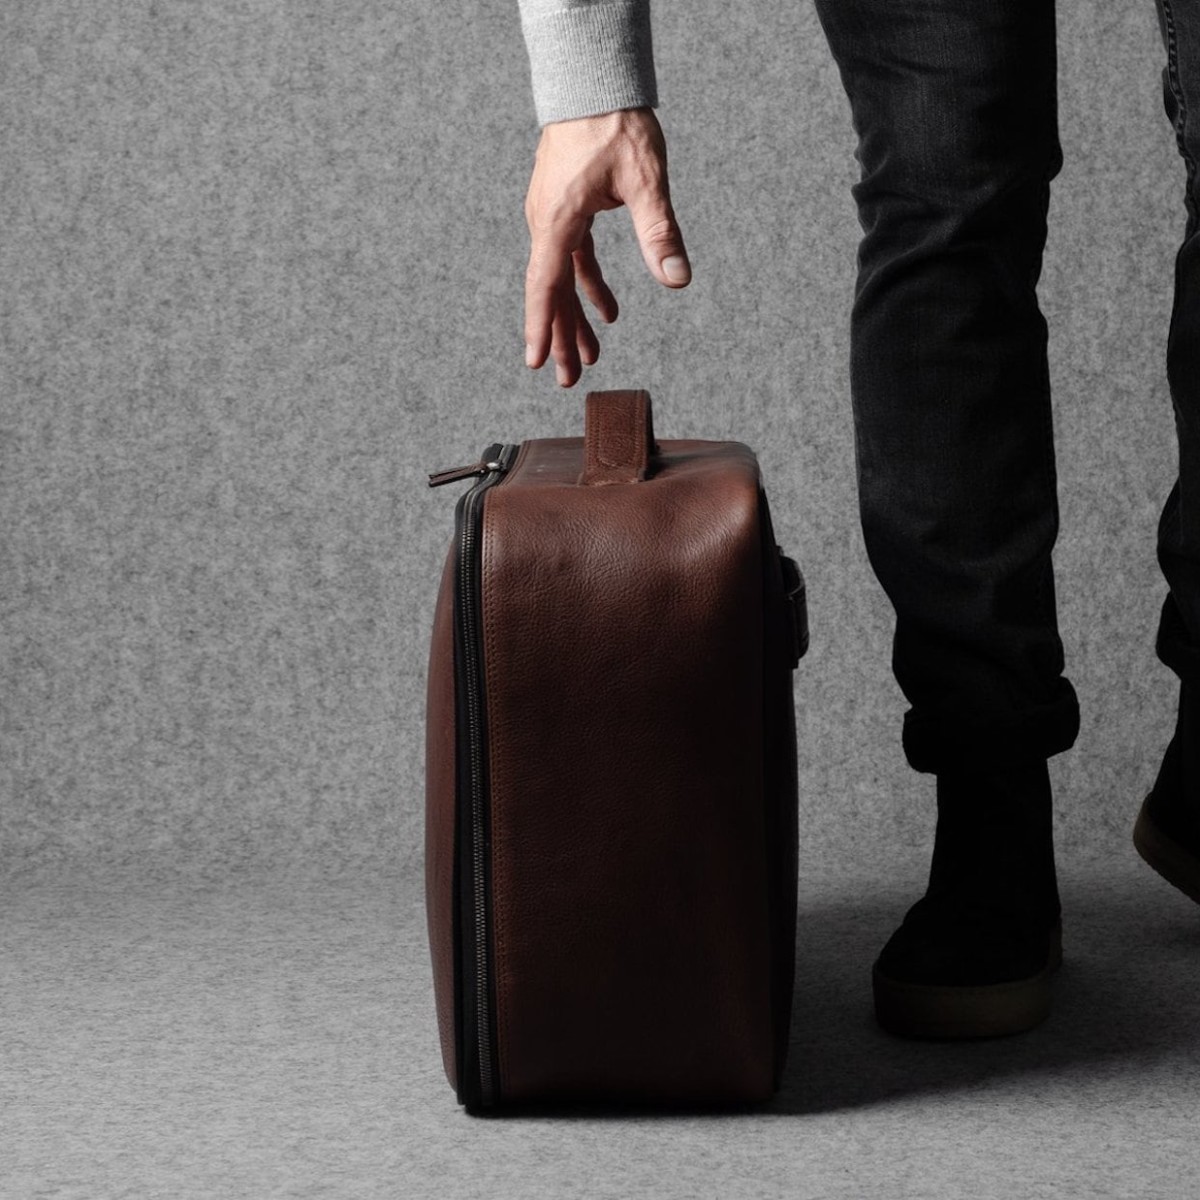 hardgraft Carry On Leather Suitcase works well on both long and short trips